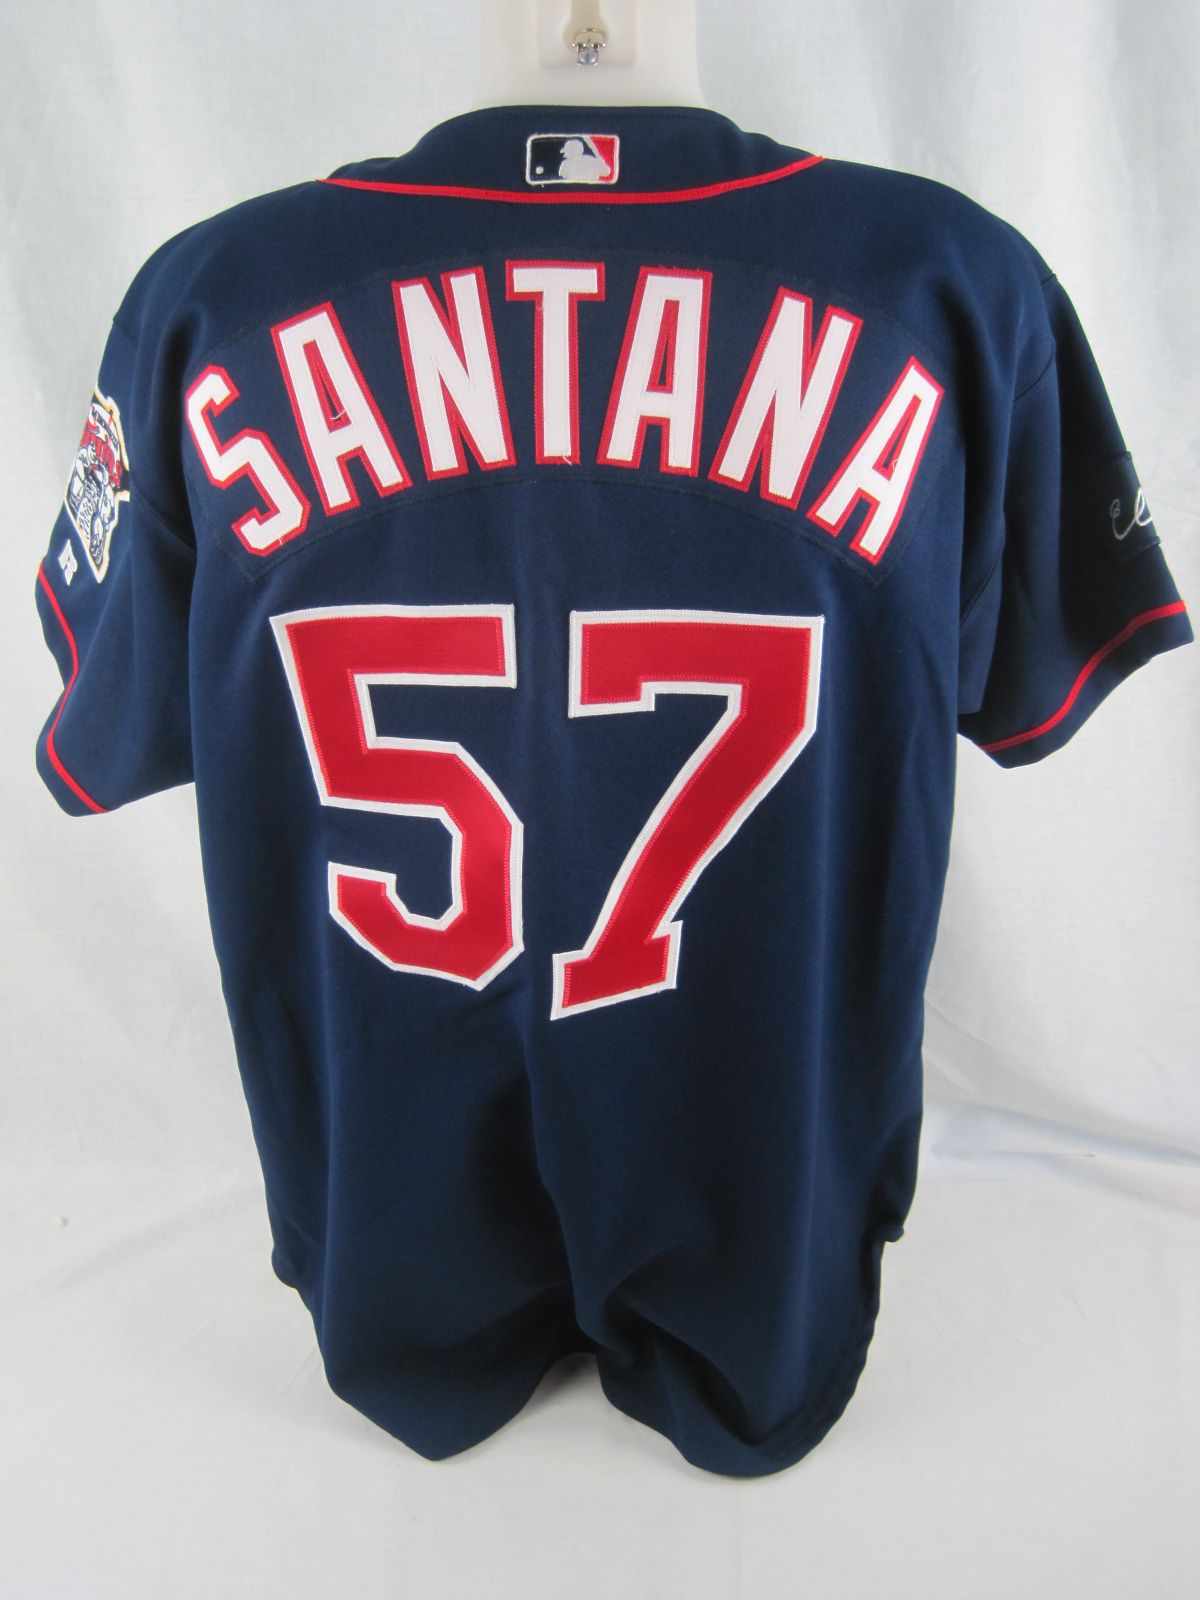 twins jersey youth